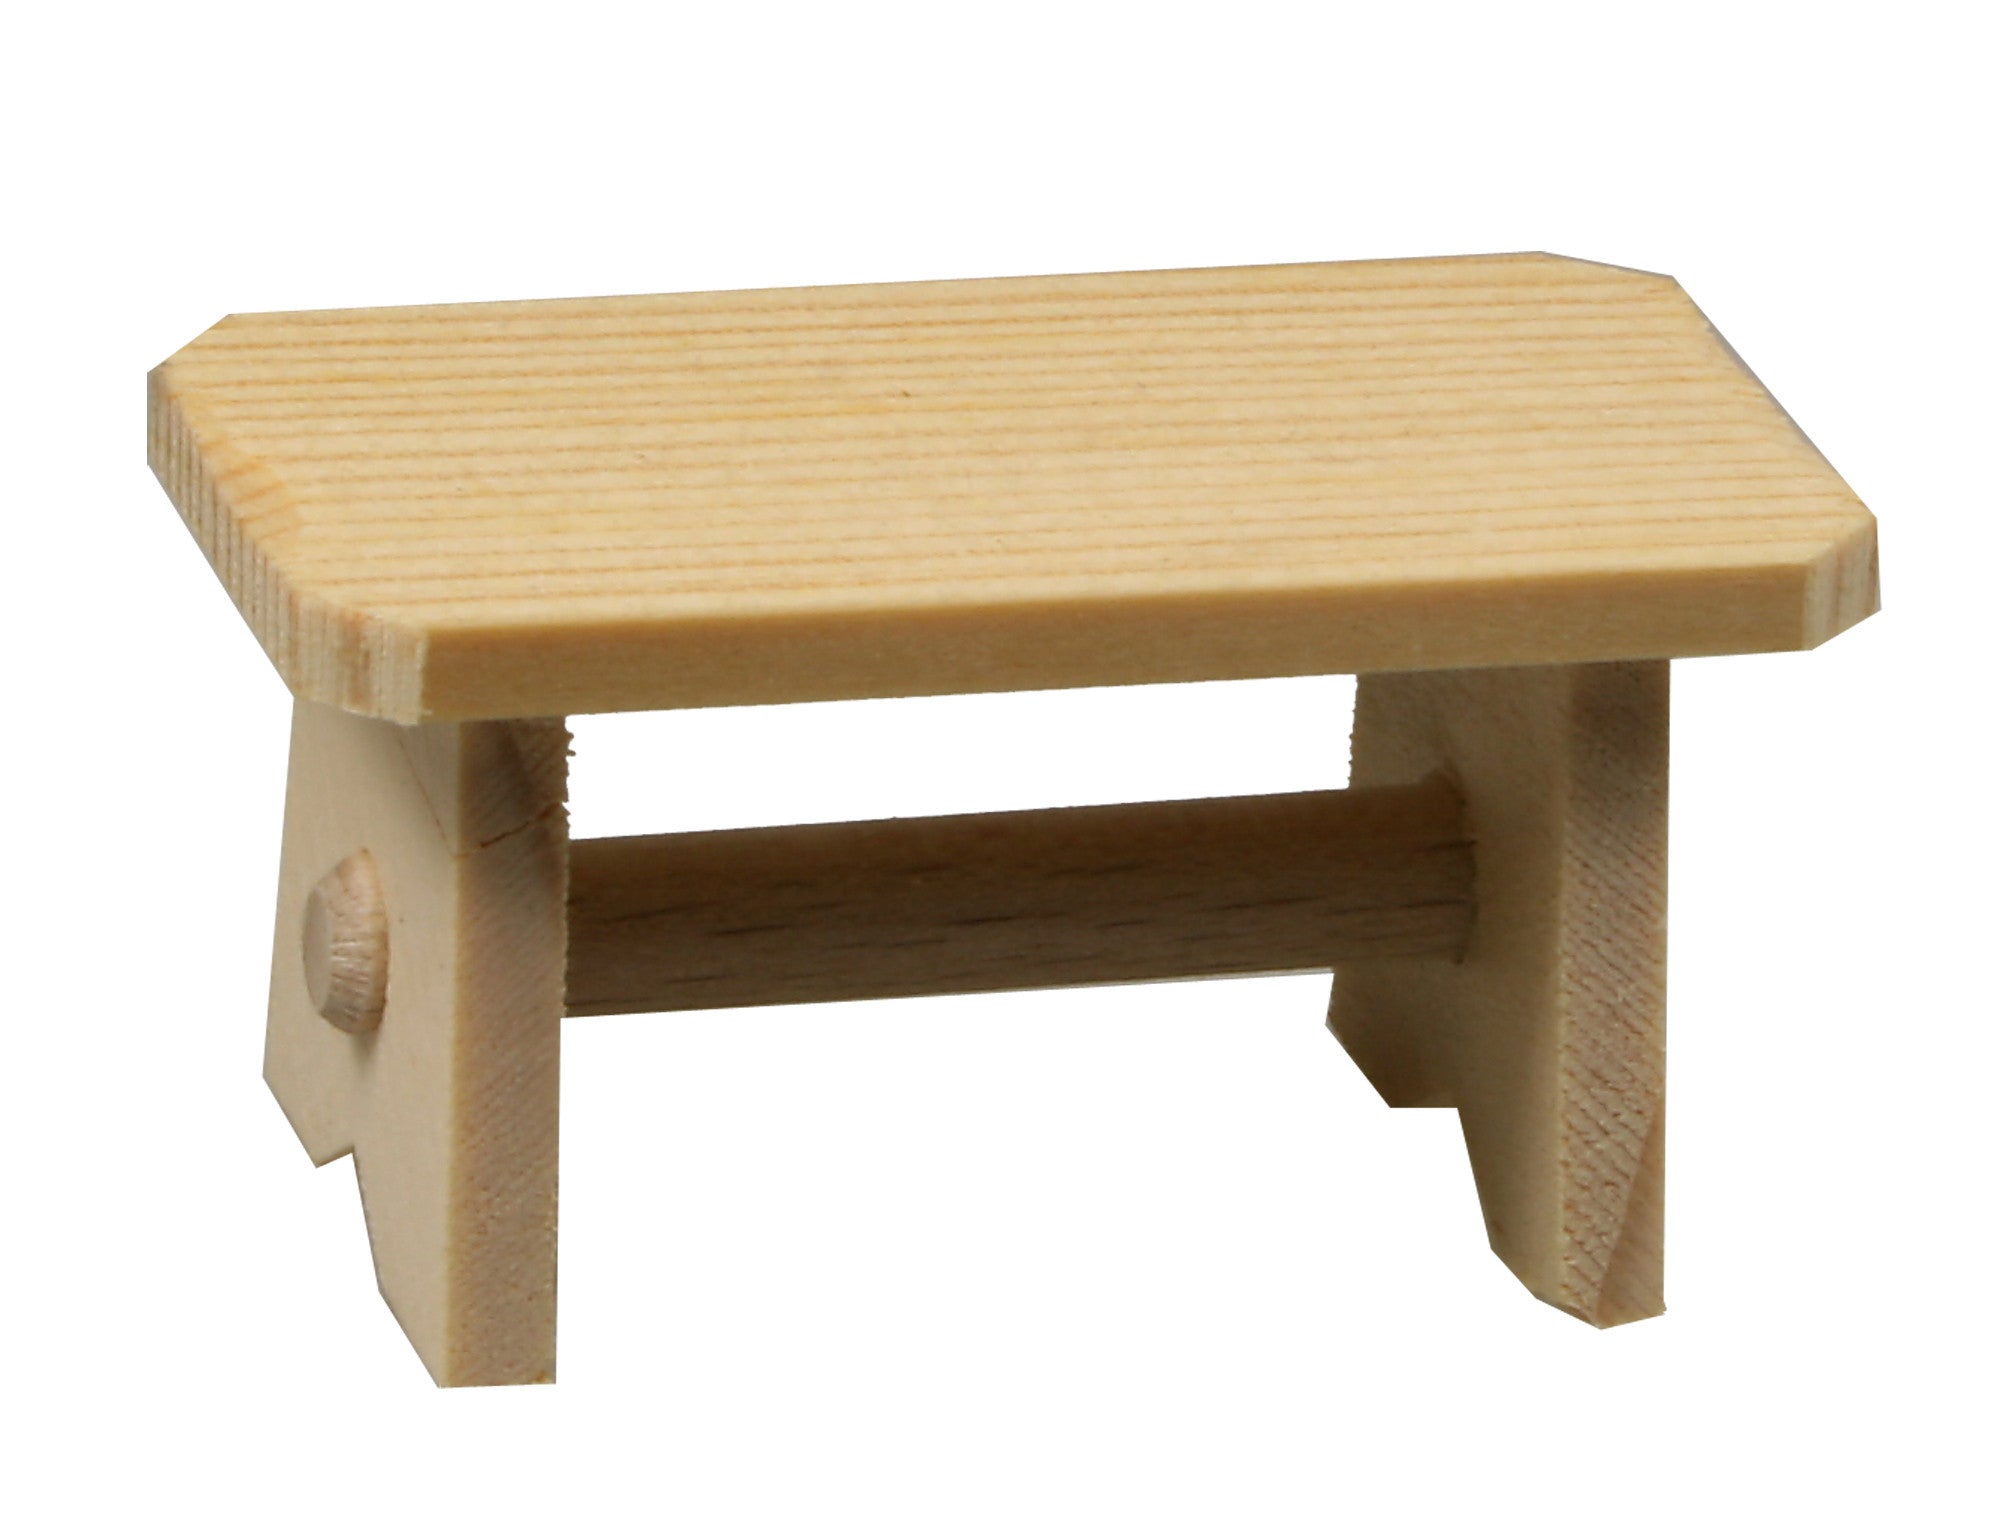 Wooden Bench or Table - 1" tall